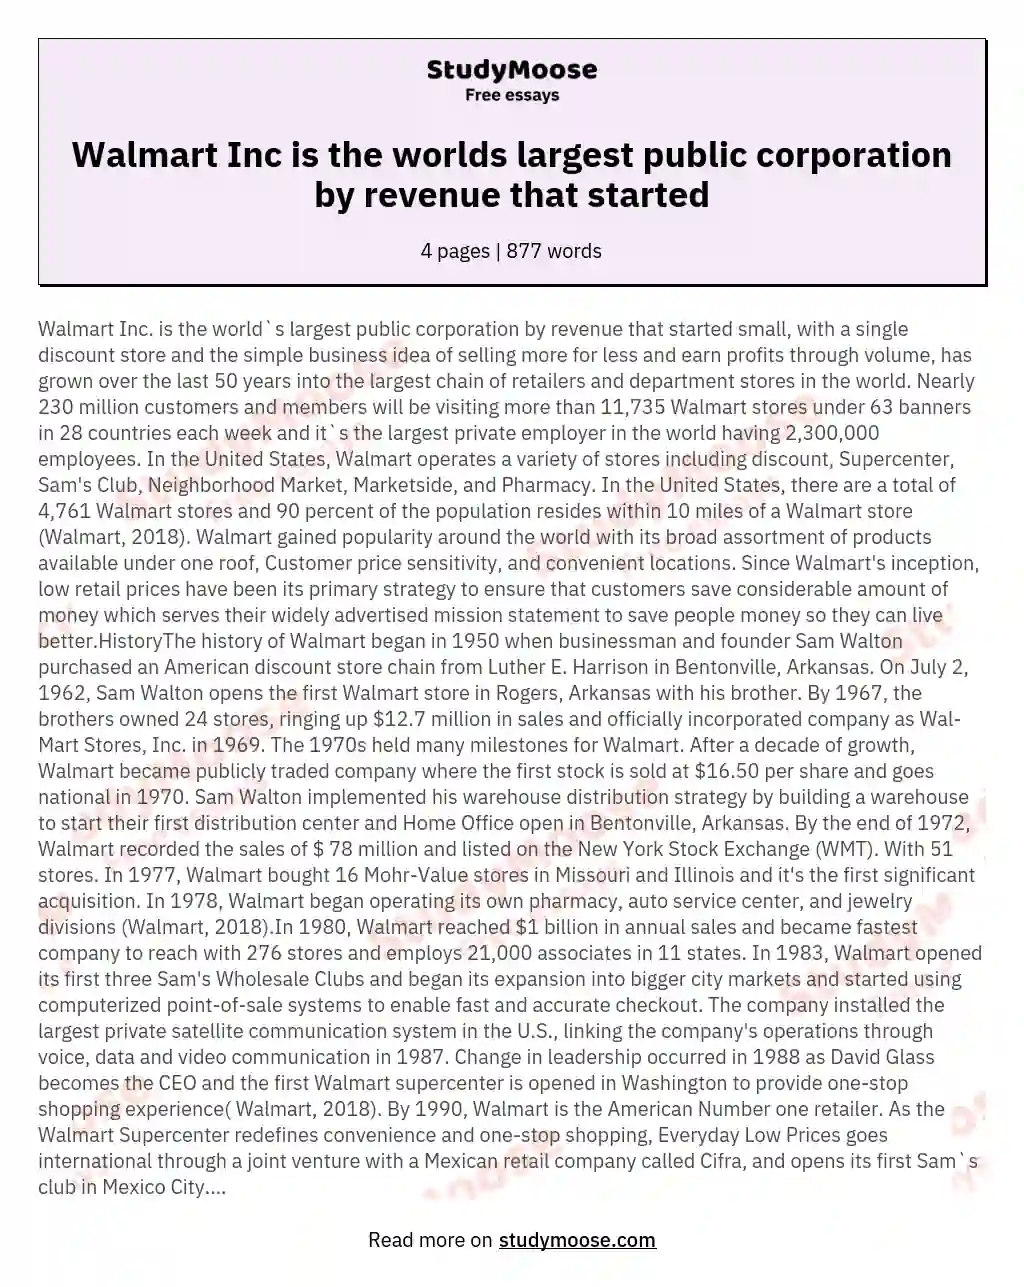 Walmart Inc is the worlds largest public corporation by revenue that started essay